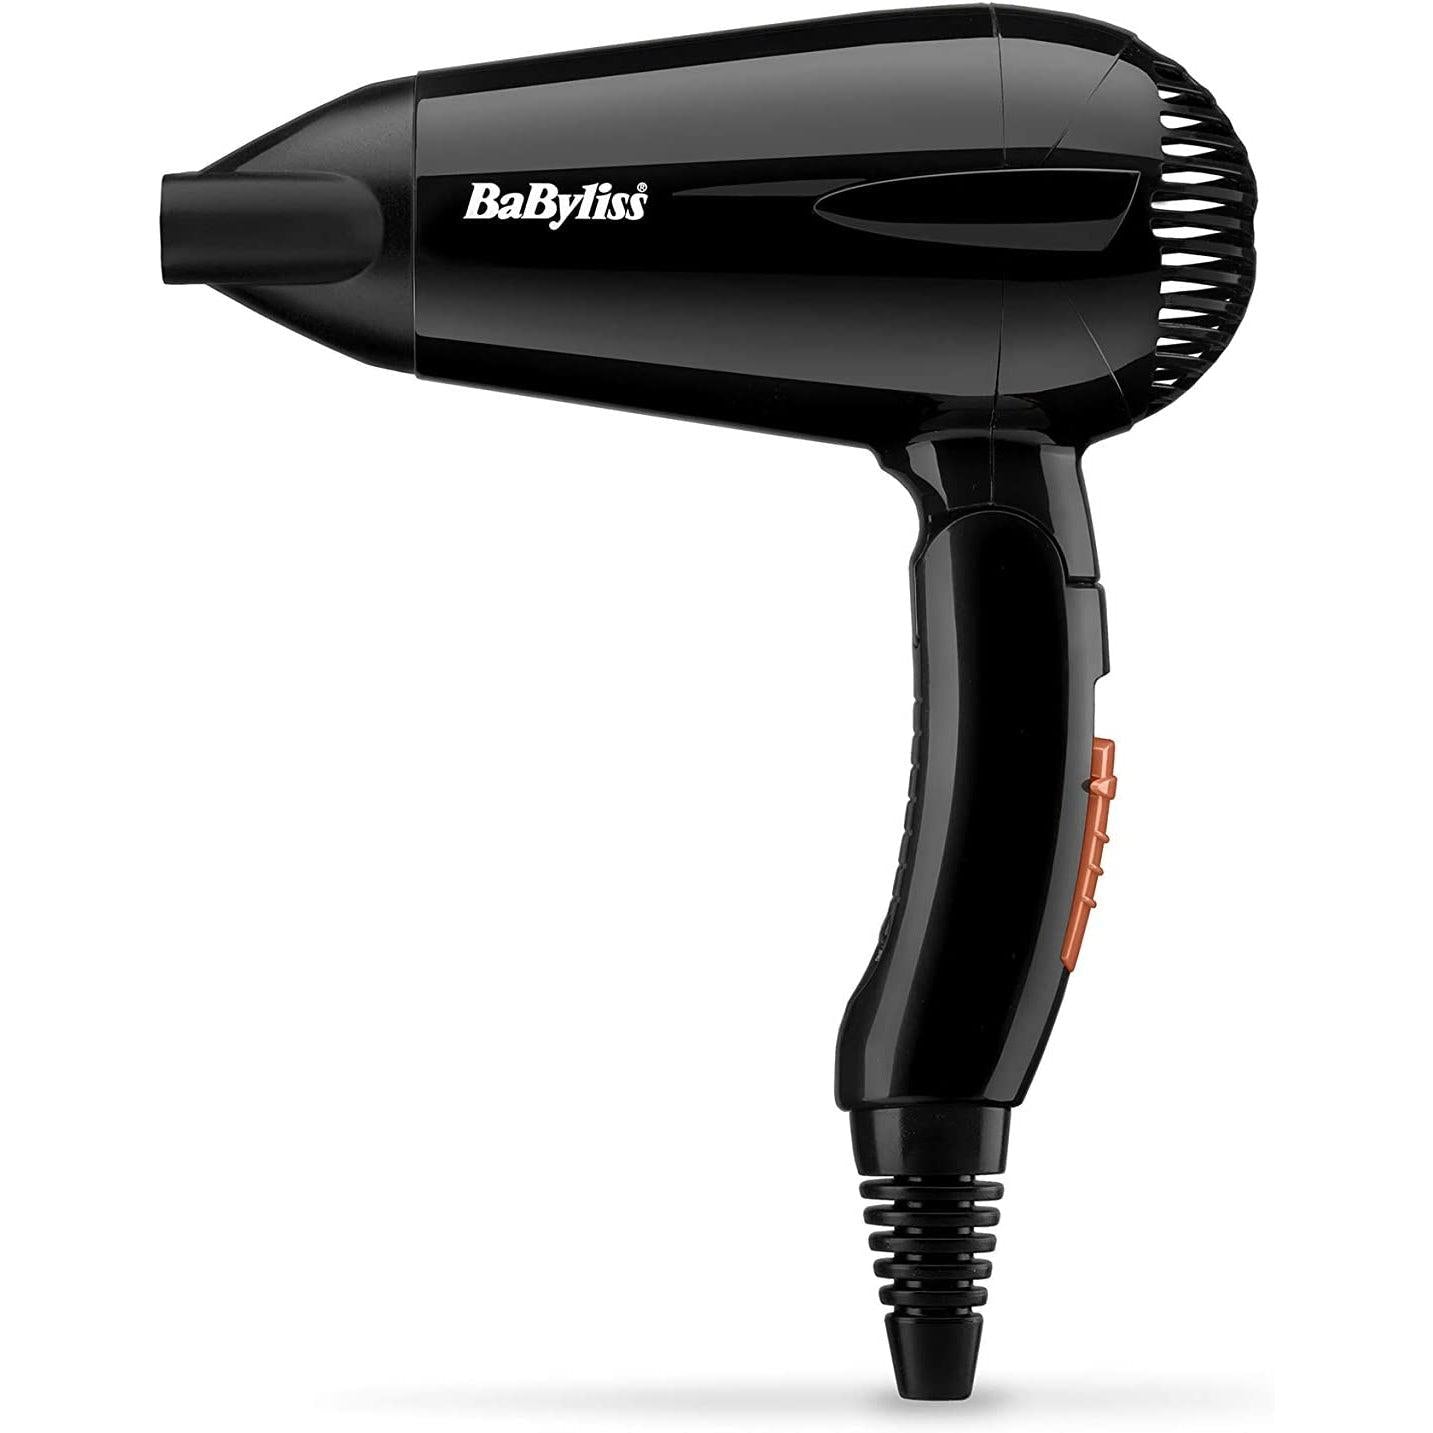 BaByliss Travel 2000 W Hair Dryer - Black - Healthxpress.ie